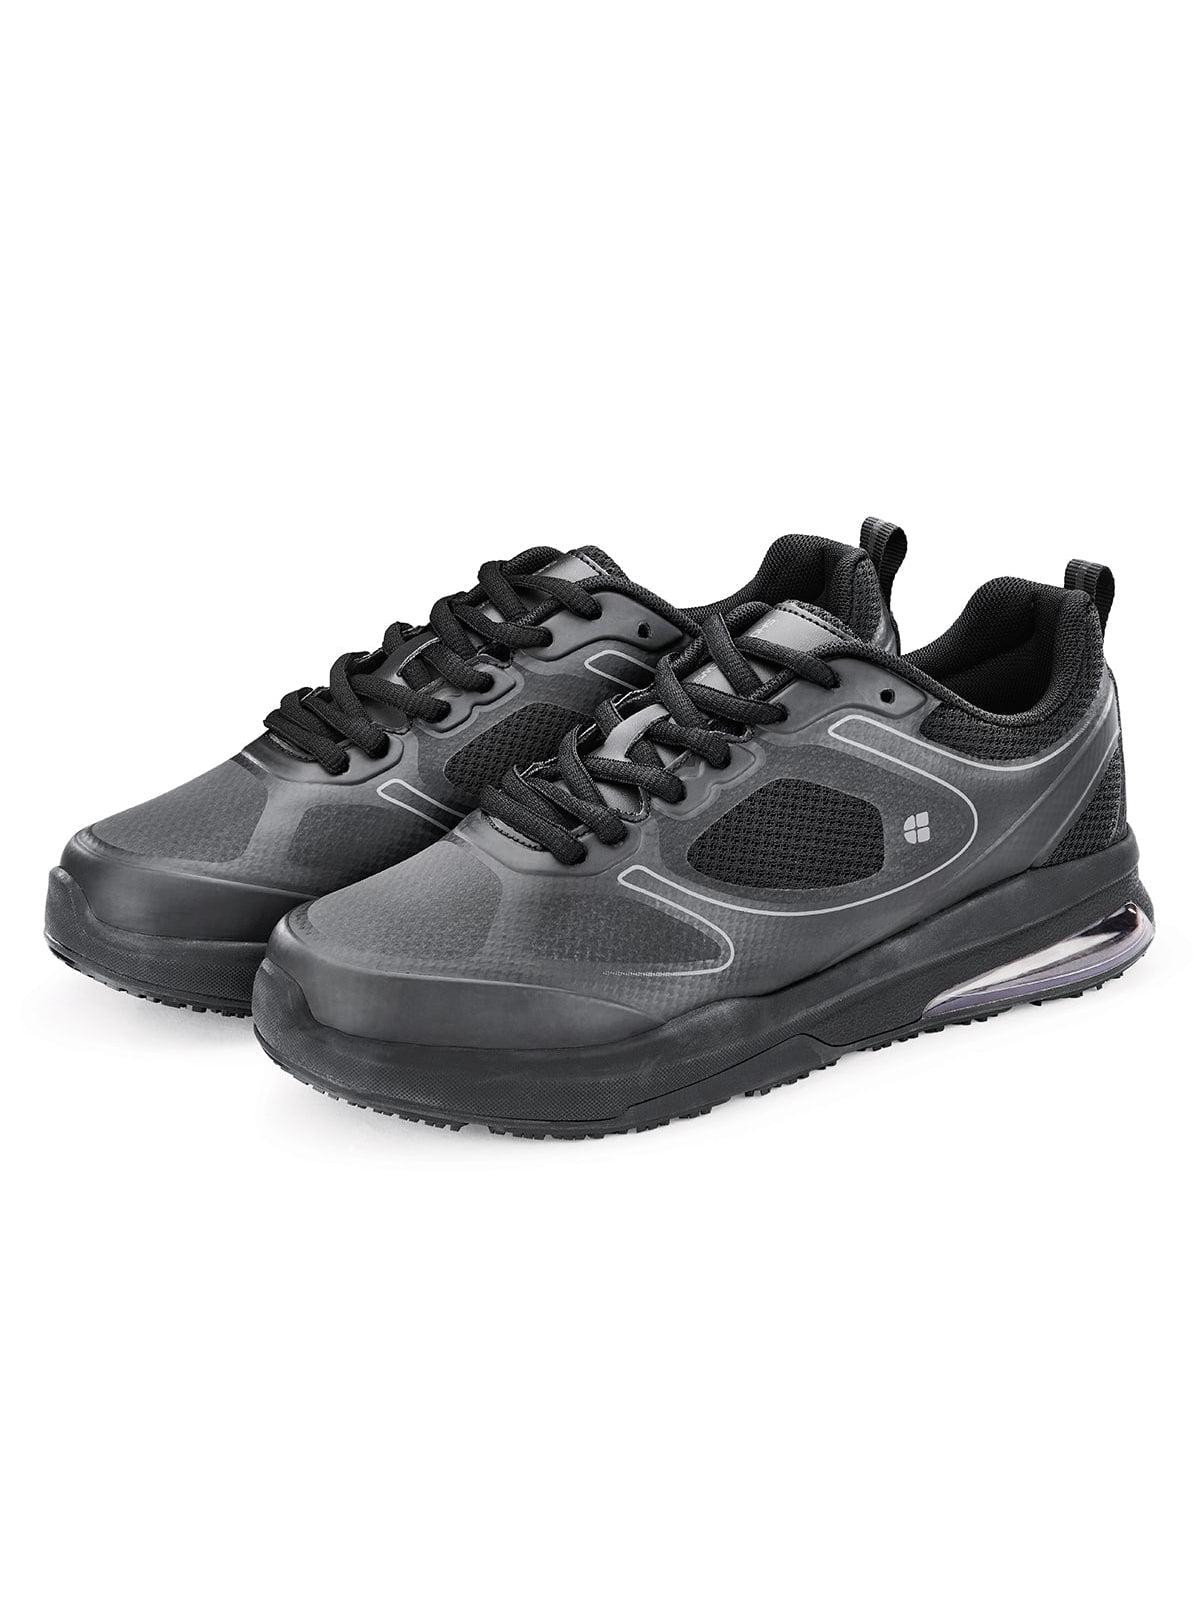 Men's Work Shoe Evolution II Black by Shoes For Crews -  ChefsCotton